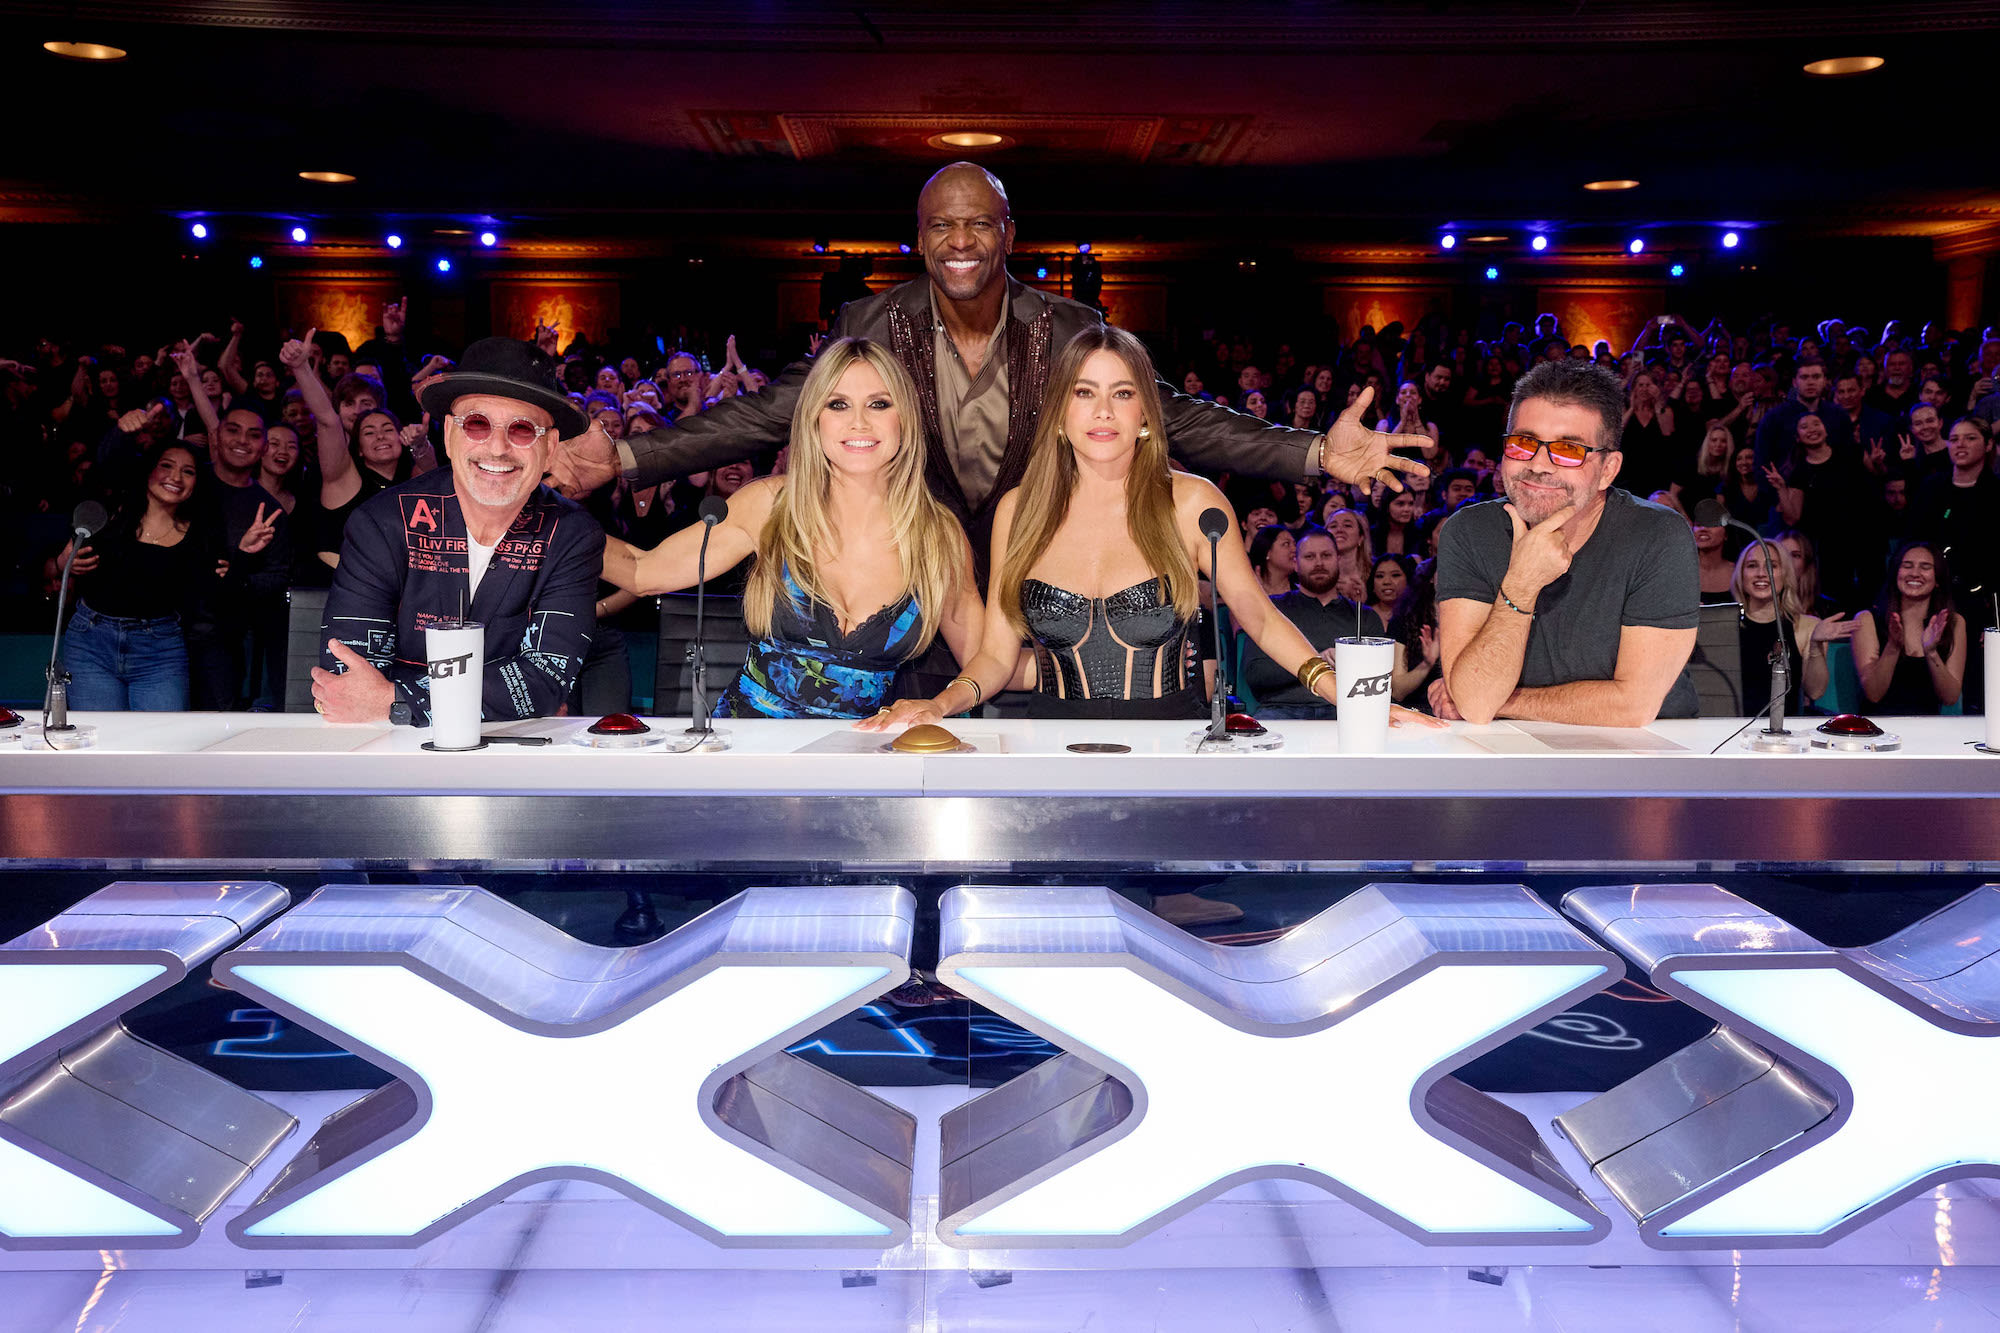 How America’s Got Talent Judges Feel About the New Golden Buzzer Rules